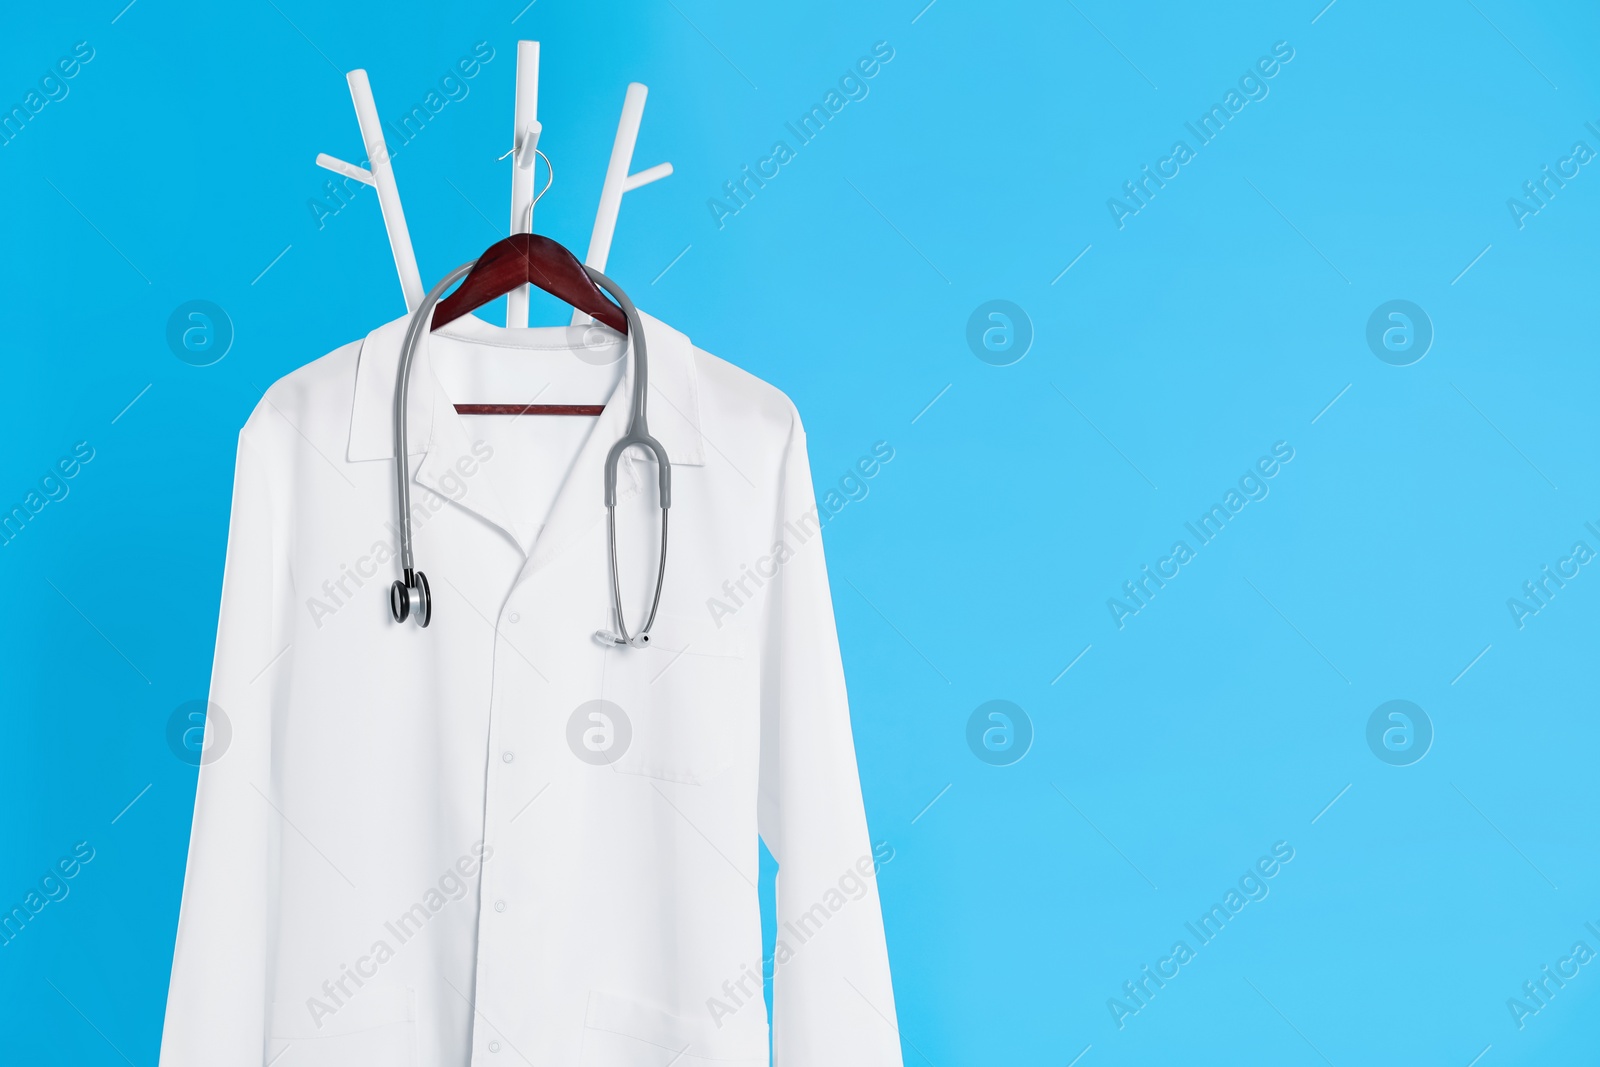 Photo of White medical uniform and stethoscope hanging on rack against light blue background. Space for text